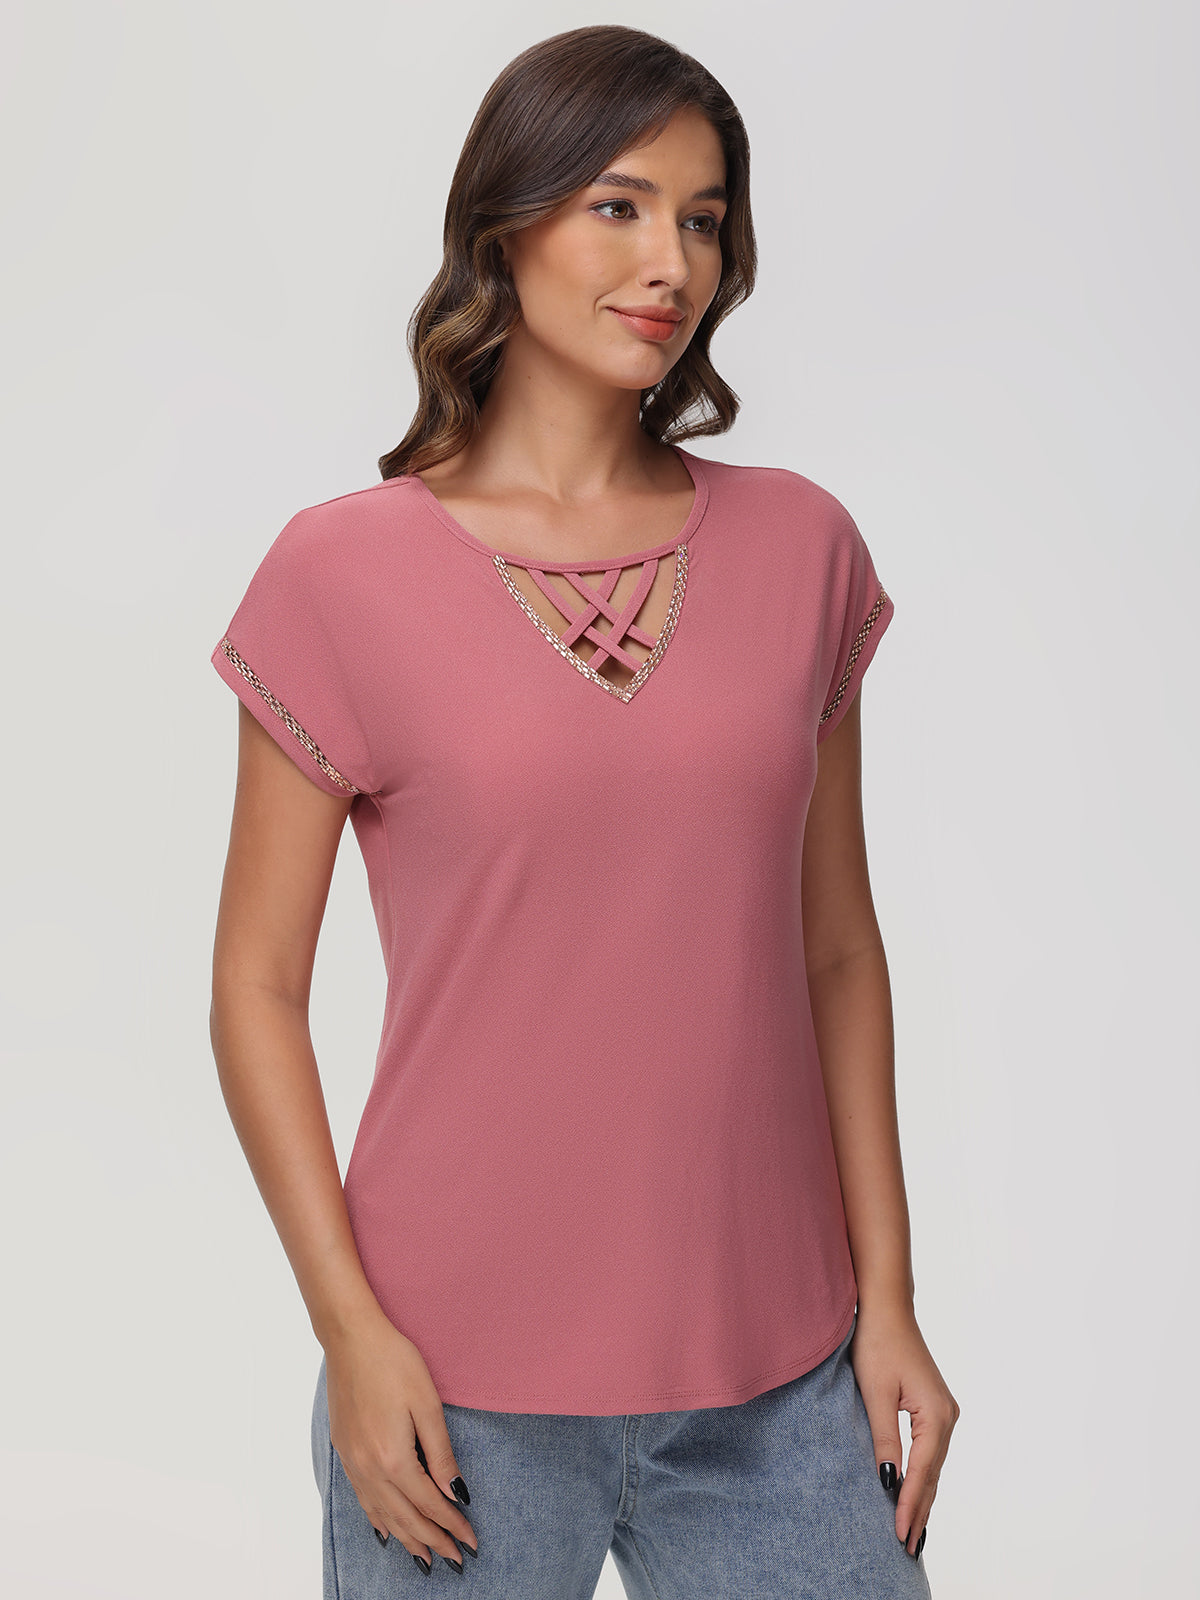 Lace Up Dolman Cool Top